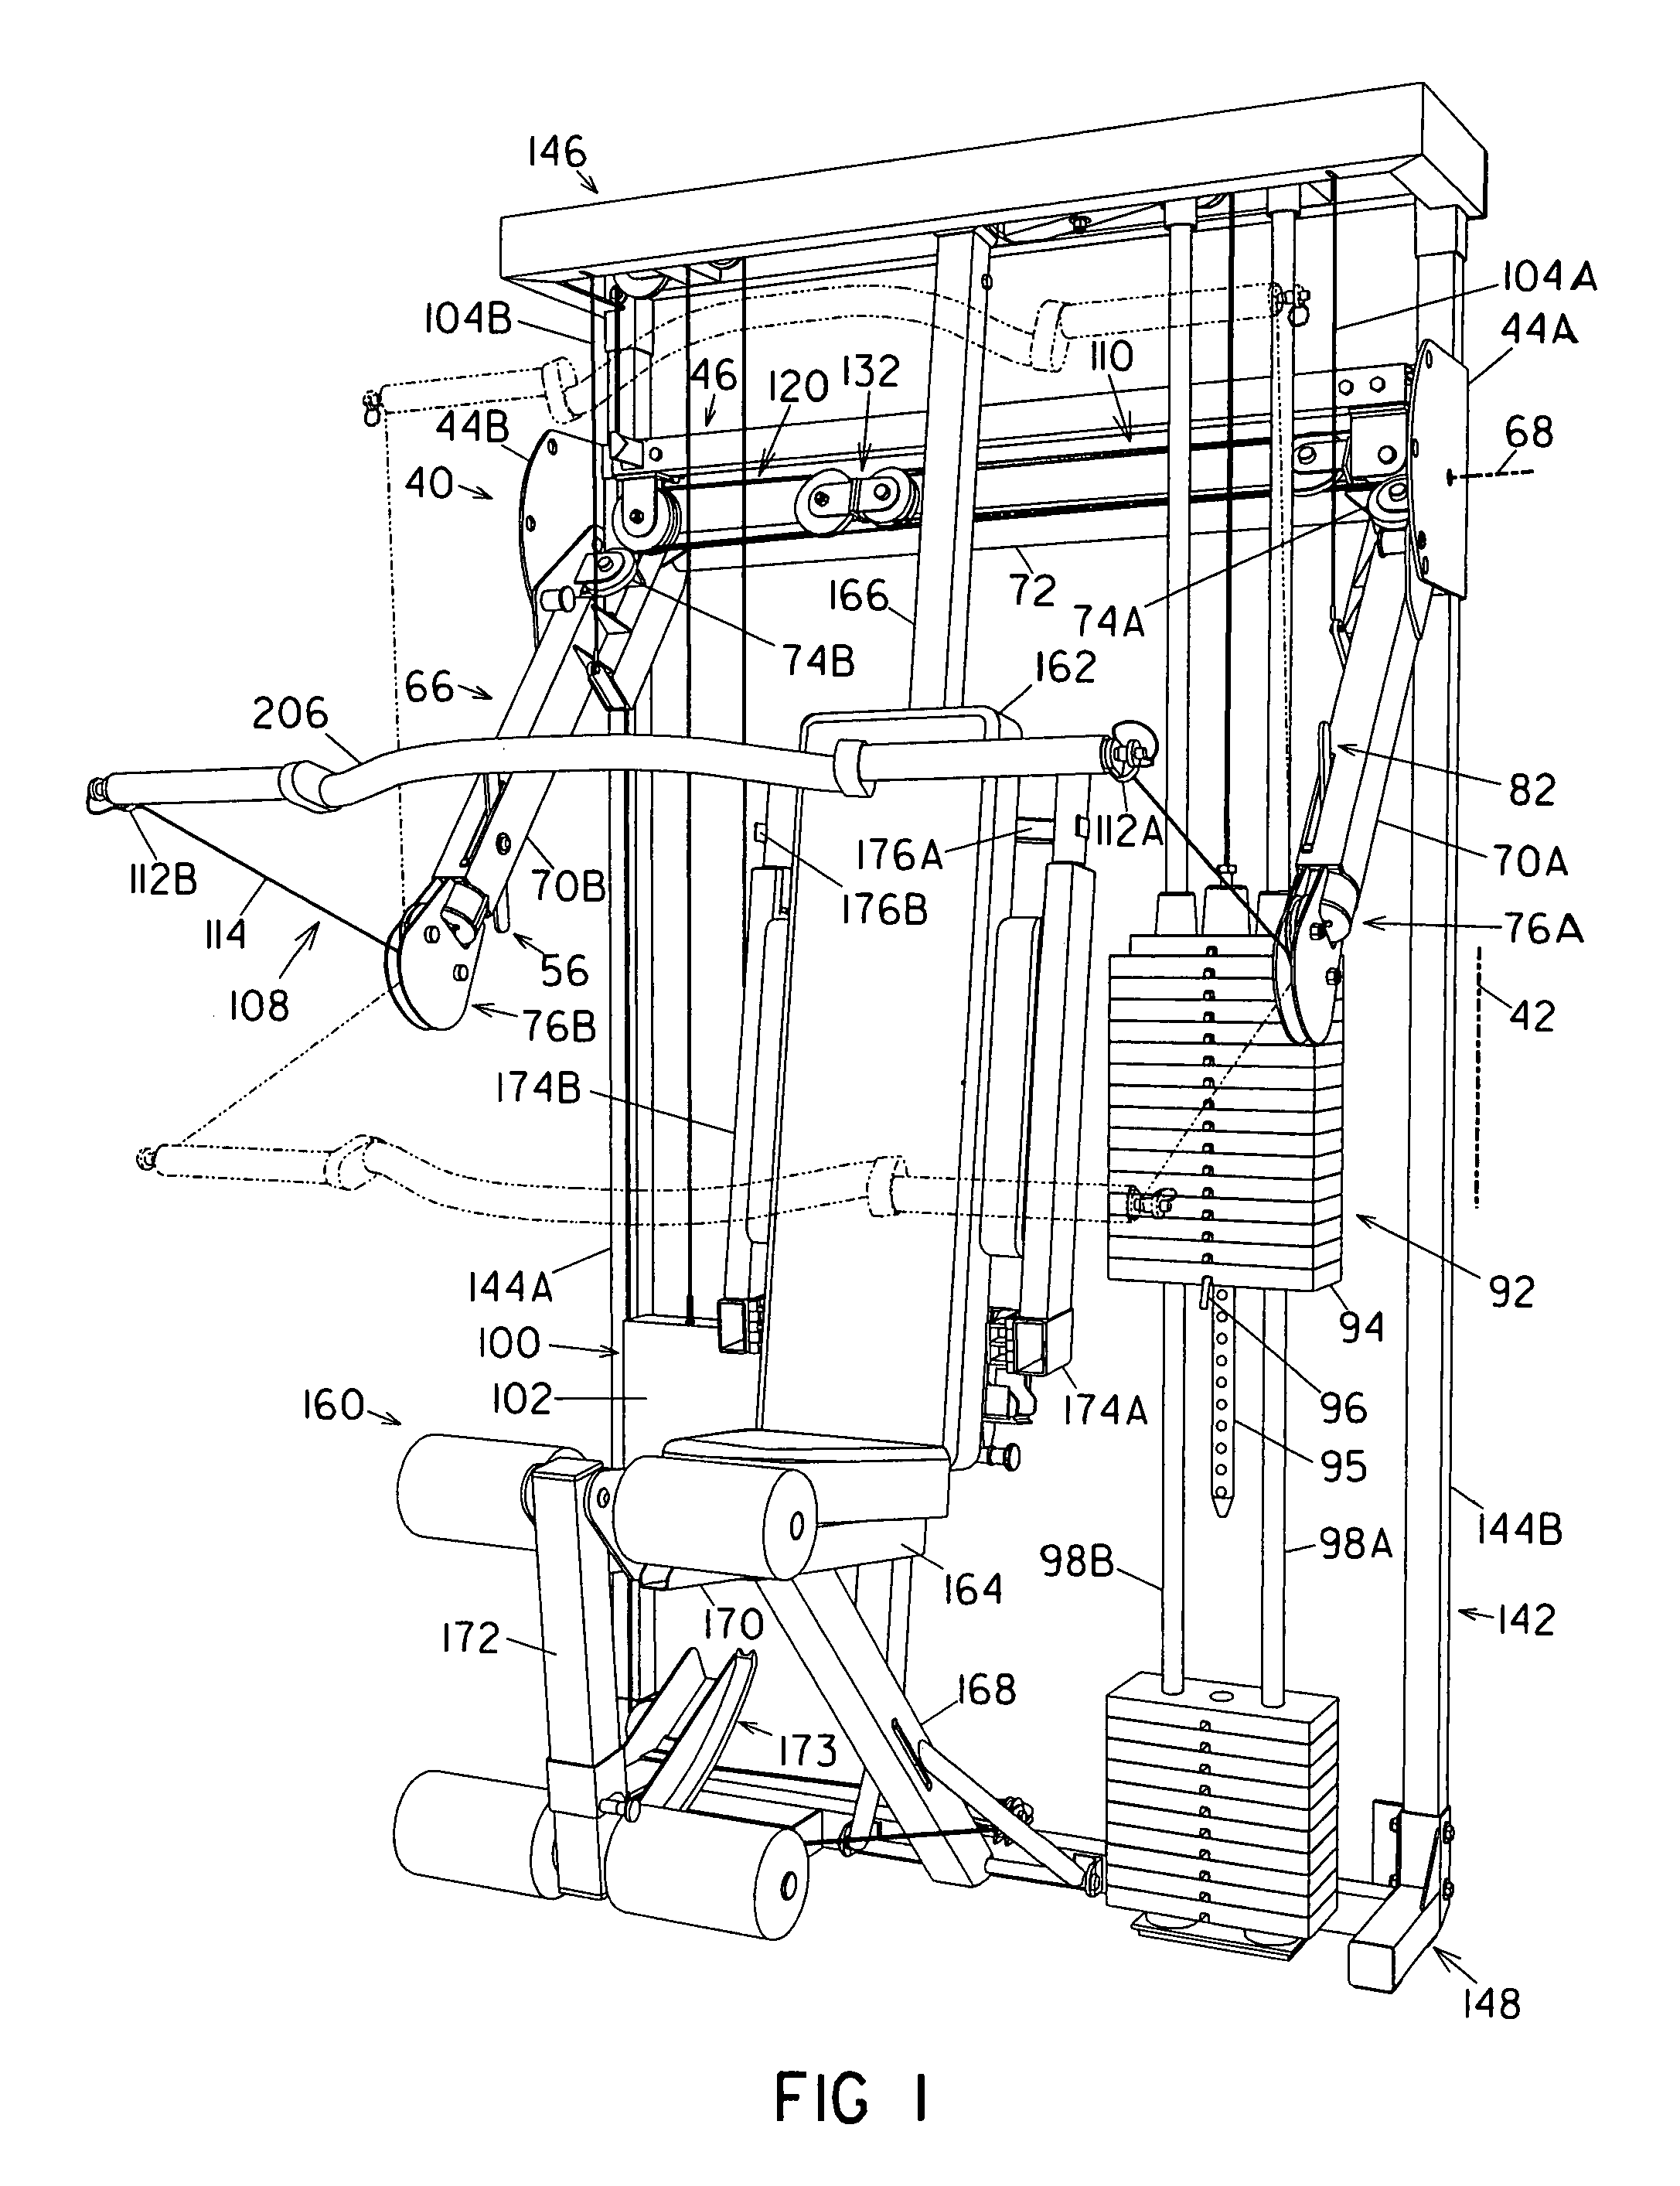 Compact multi-function exercise apparatus